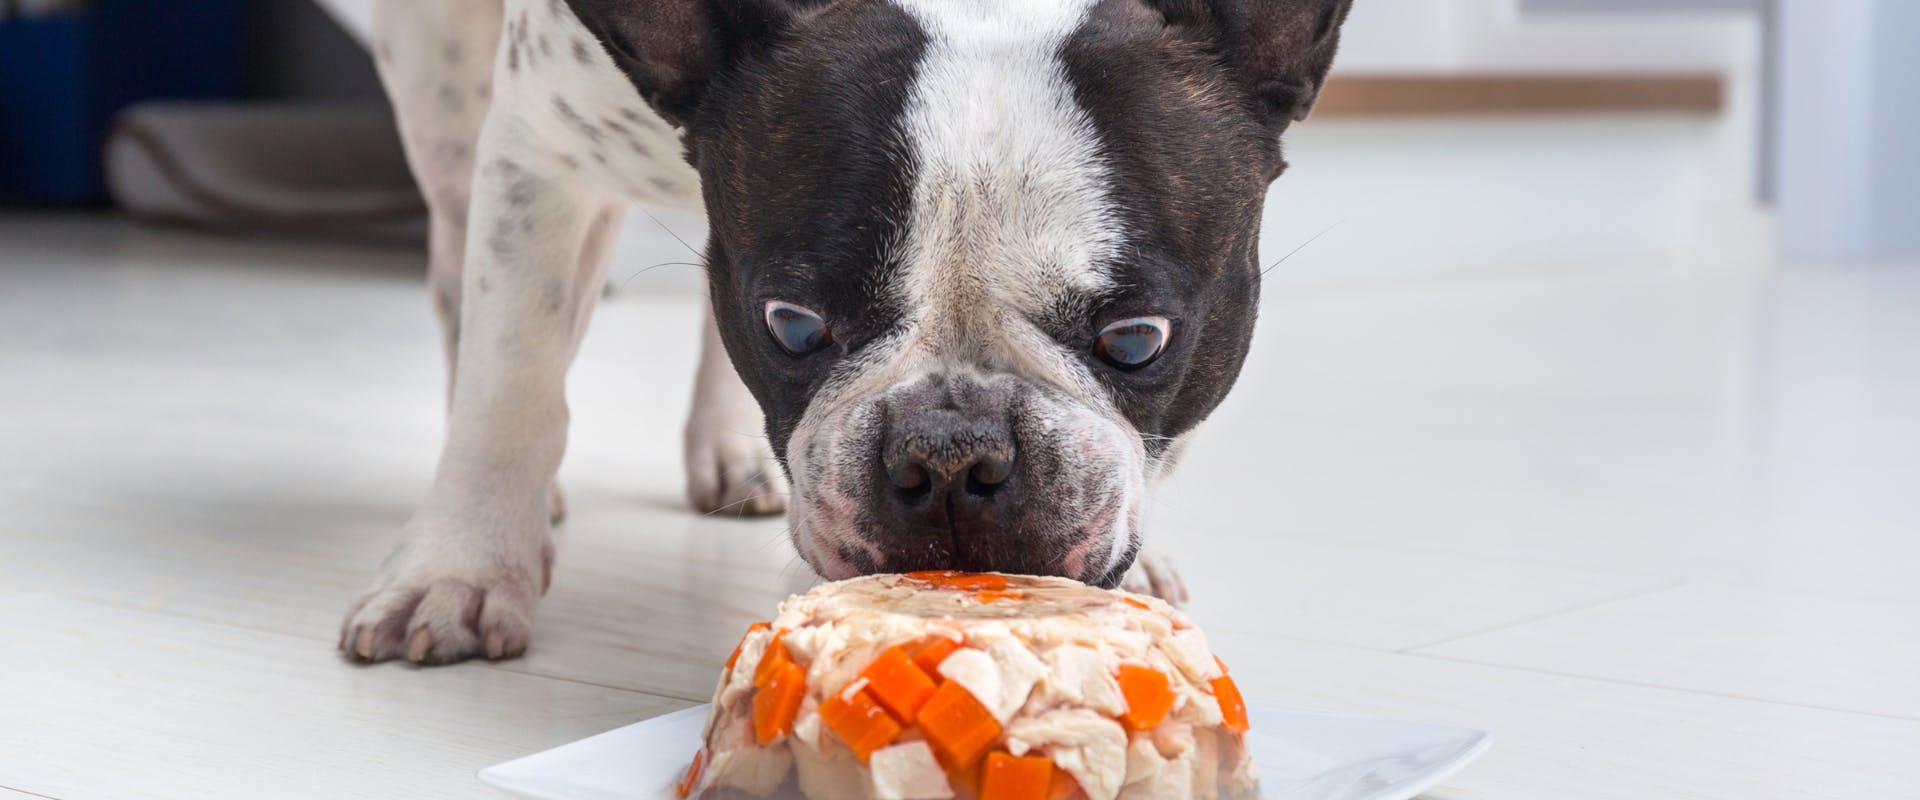 French Bulldog eating chicken in jelly